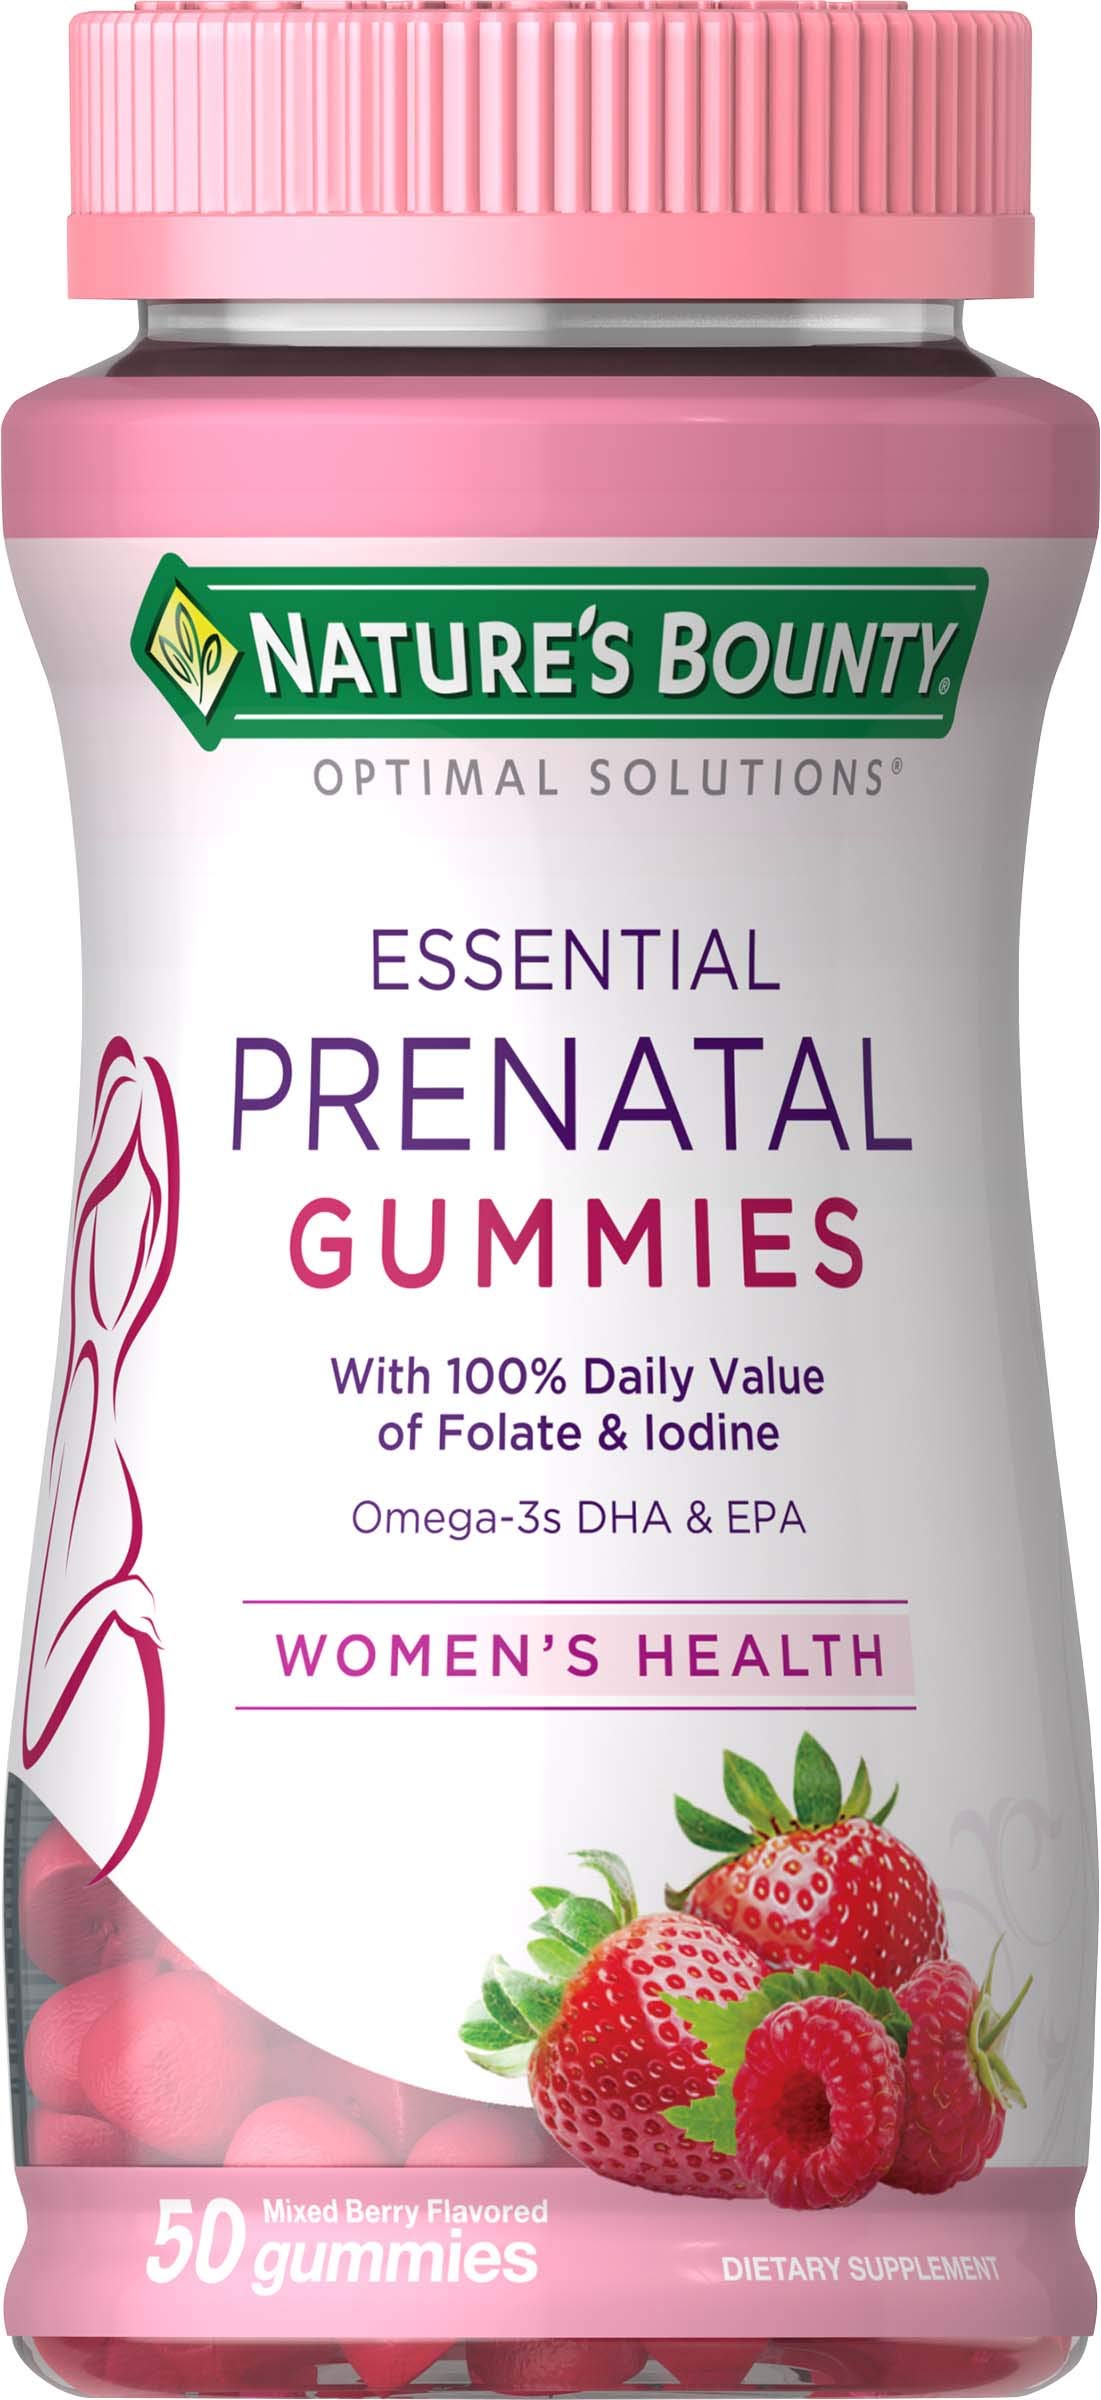 Nature's Bounty Natures Bounty Essential Prenatal gummies, Folic Acid and Iodine, Omega 3 and DHA, 50 count